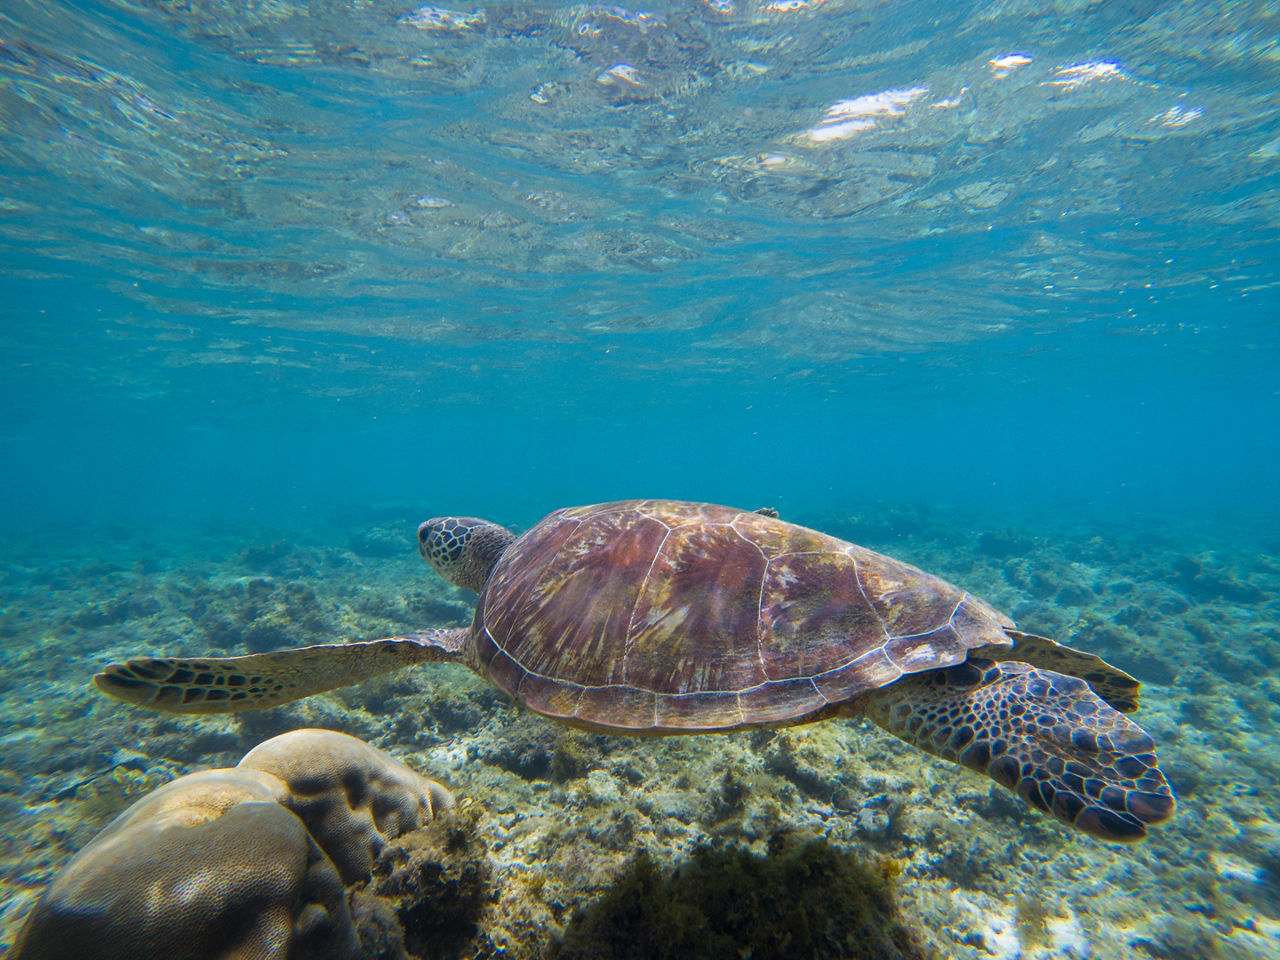 A sea turtle swimming in shallow water